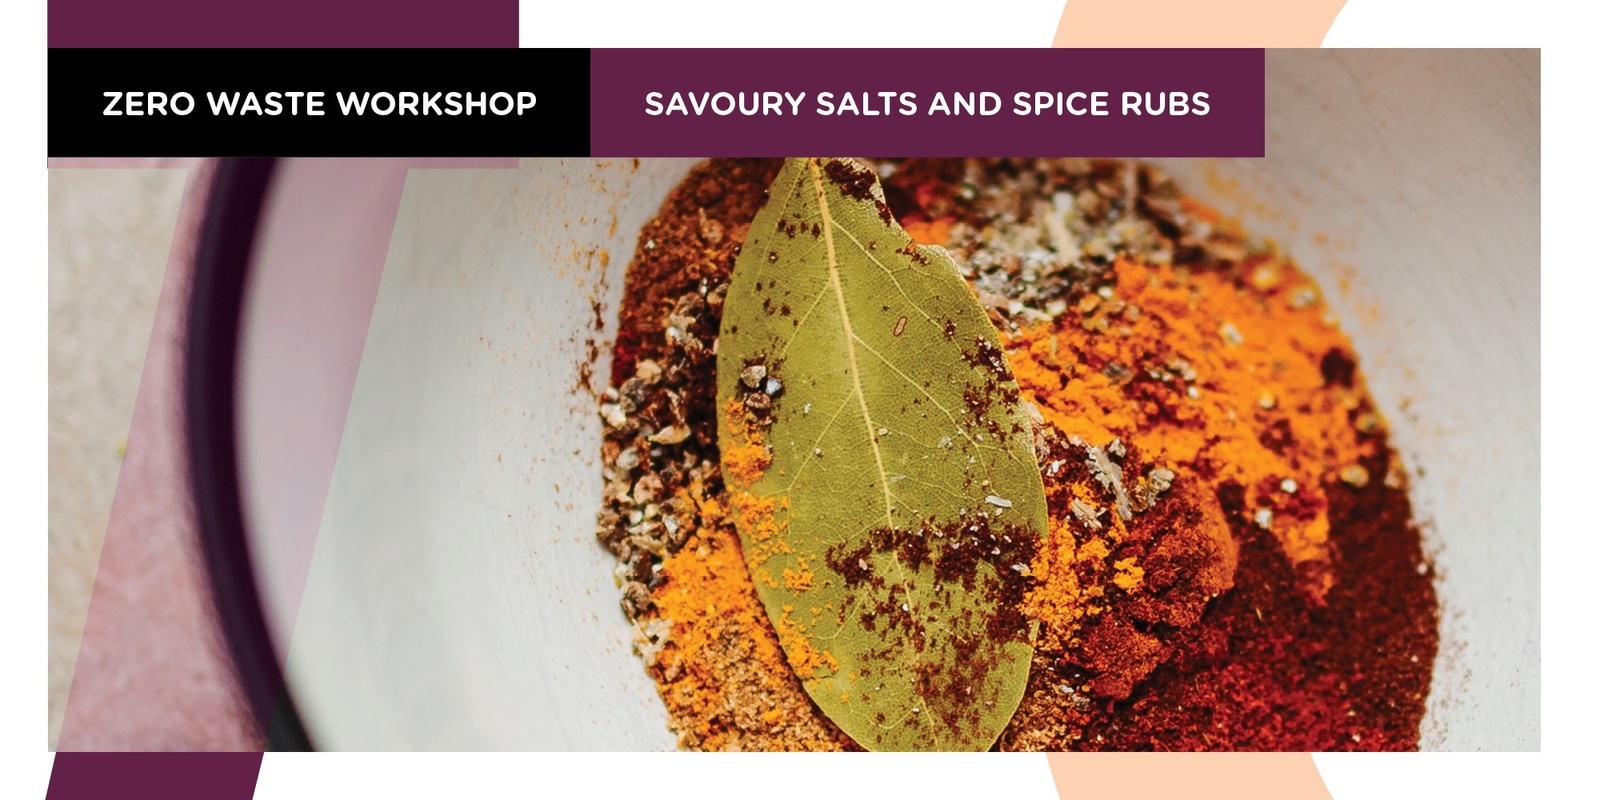 Savoury Salts and Spice Rubs - A Zero Waste Workshop with Michelle Kays